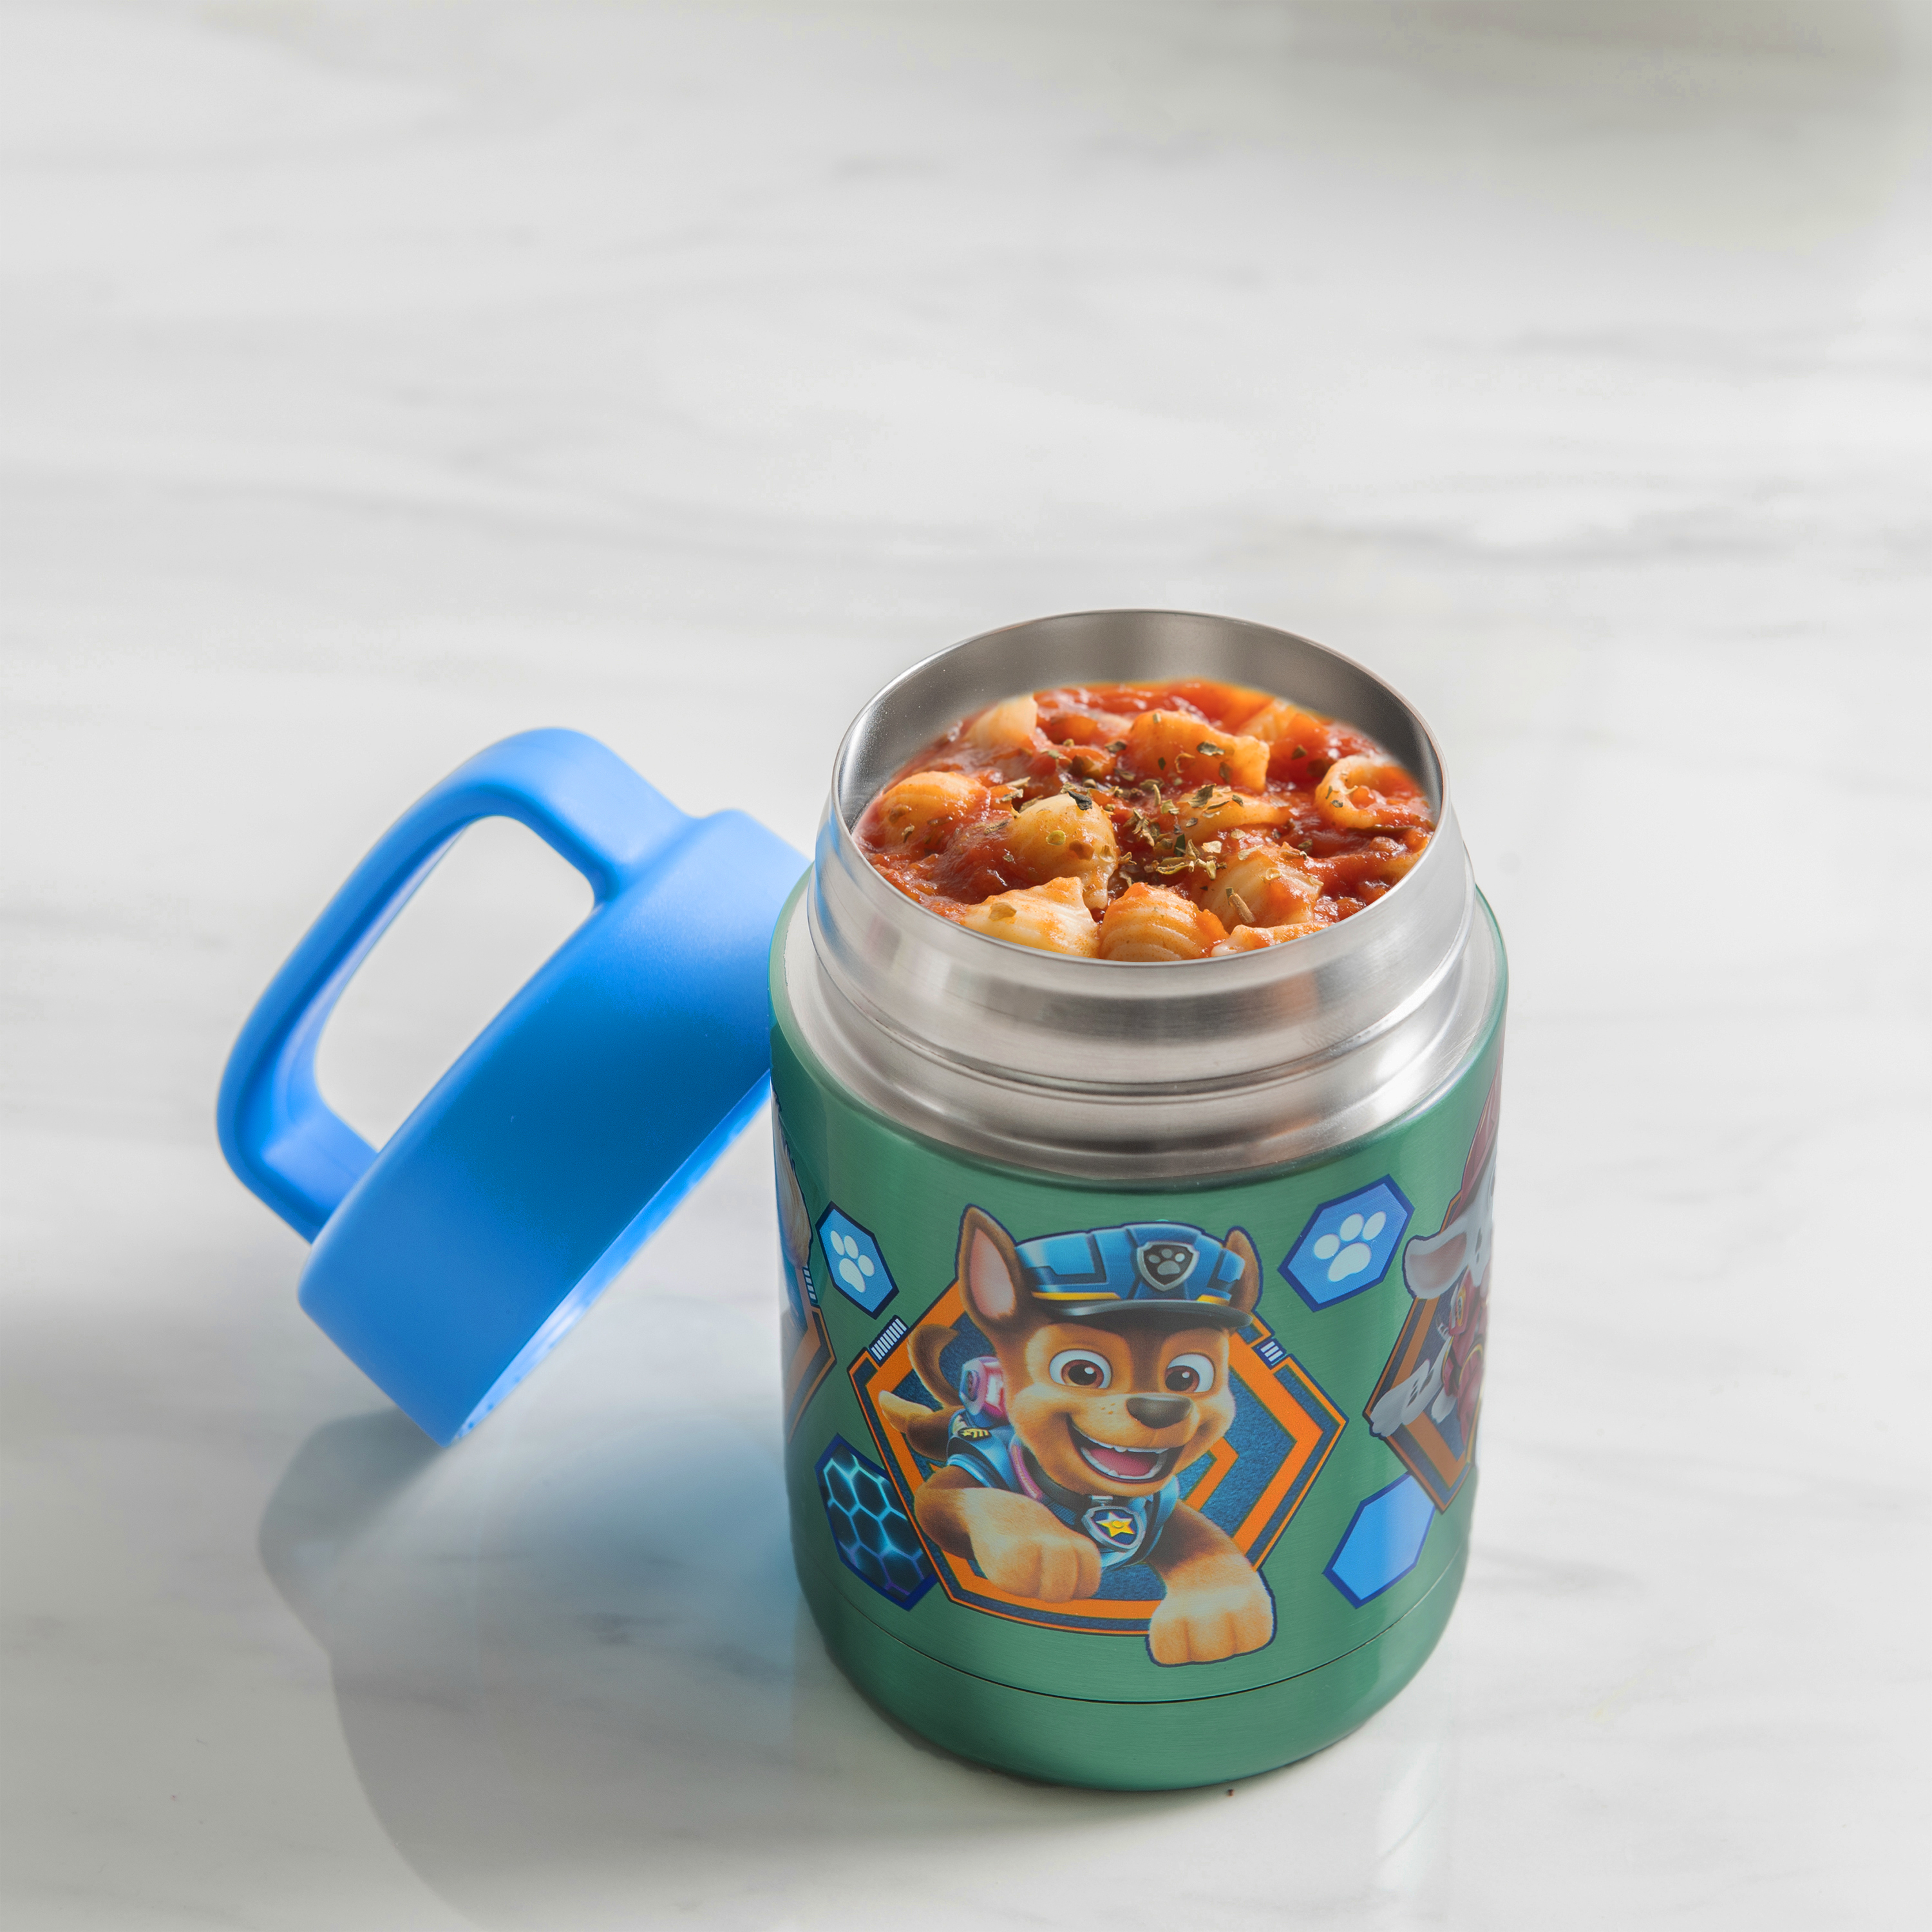 Paw Patrol Movie Reusable Vacuum Insulated Stainless Steel Food Container, Marshall, Chase and Friends slideshow image 5